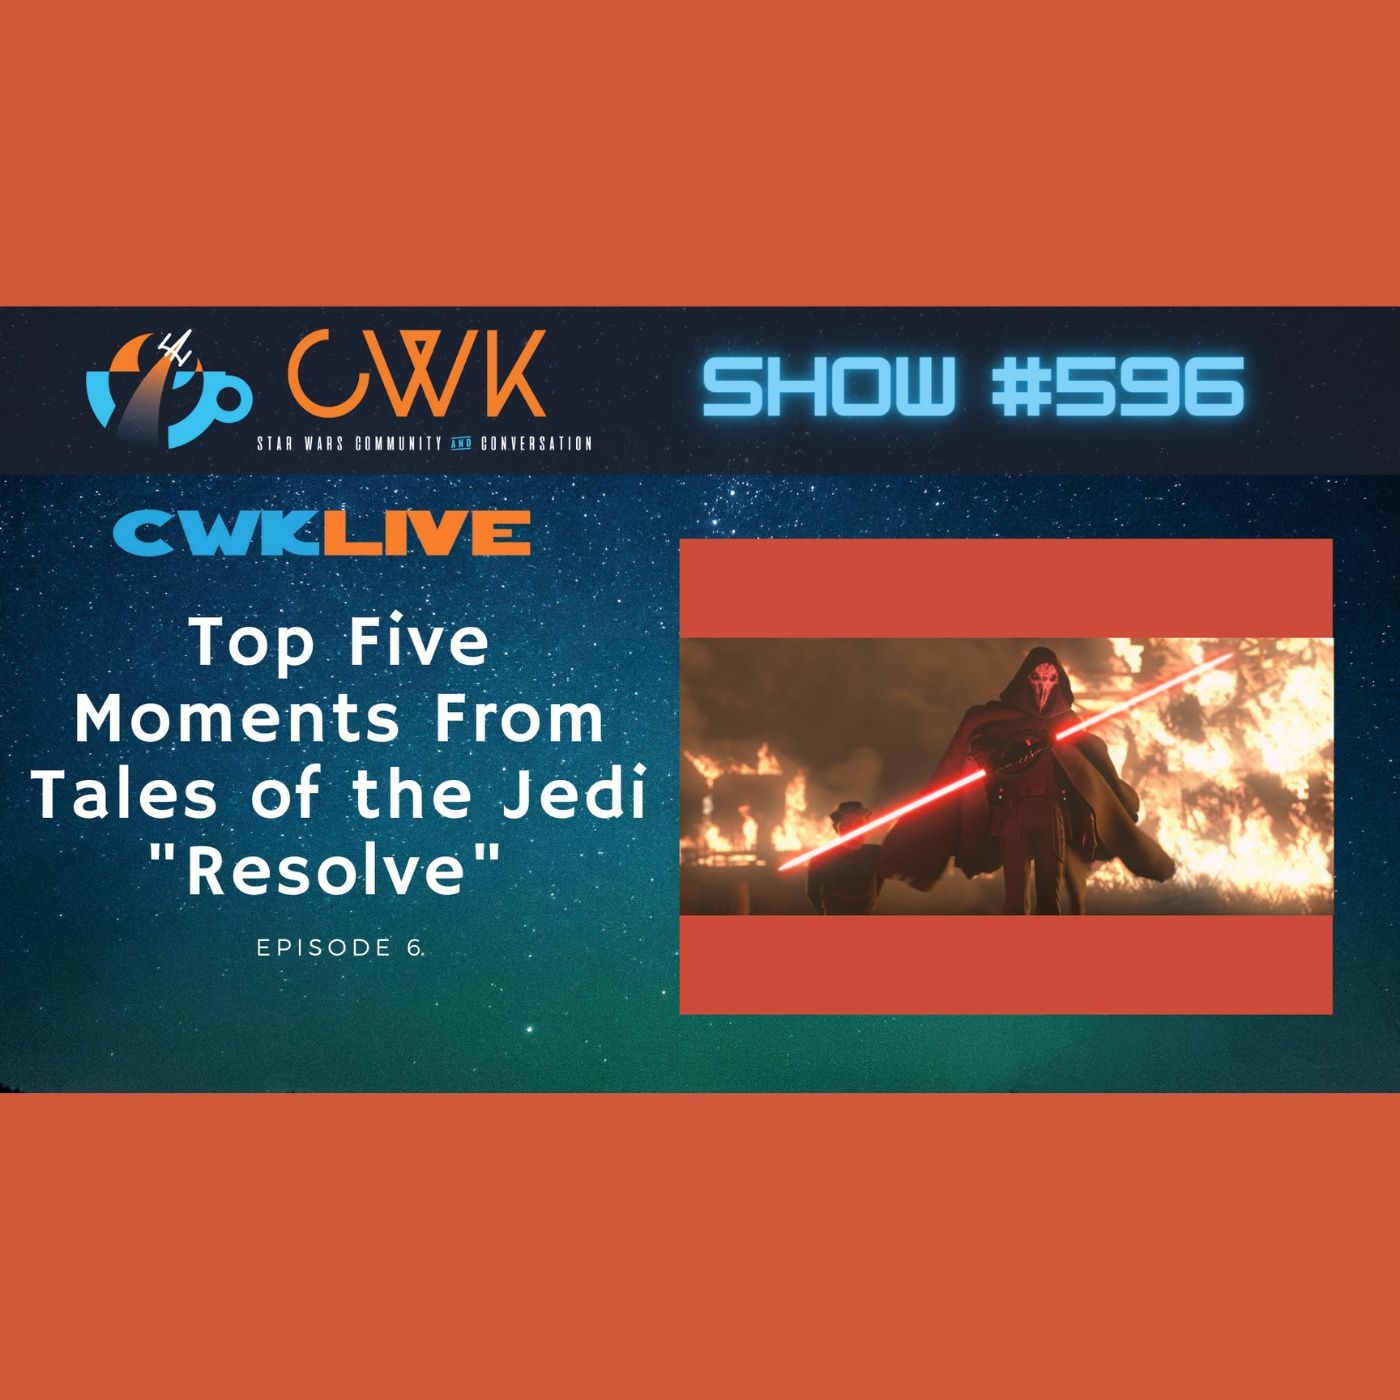 CWK Show #596 LIVE: Top Five Moments From Tales of the Jedi ”Resolve”